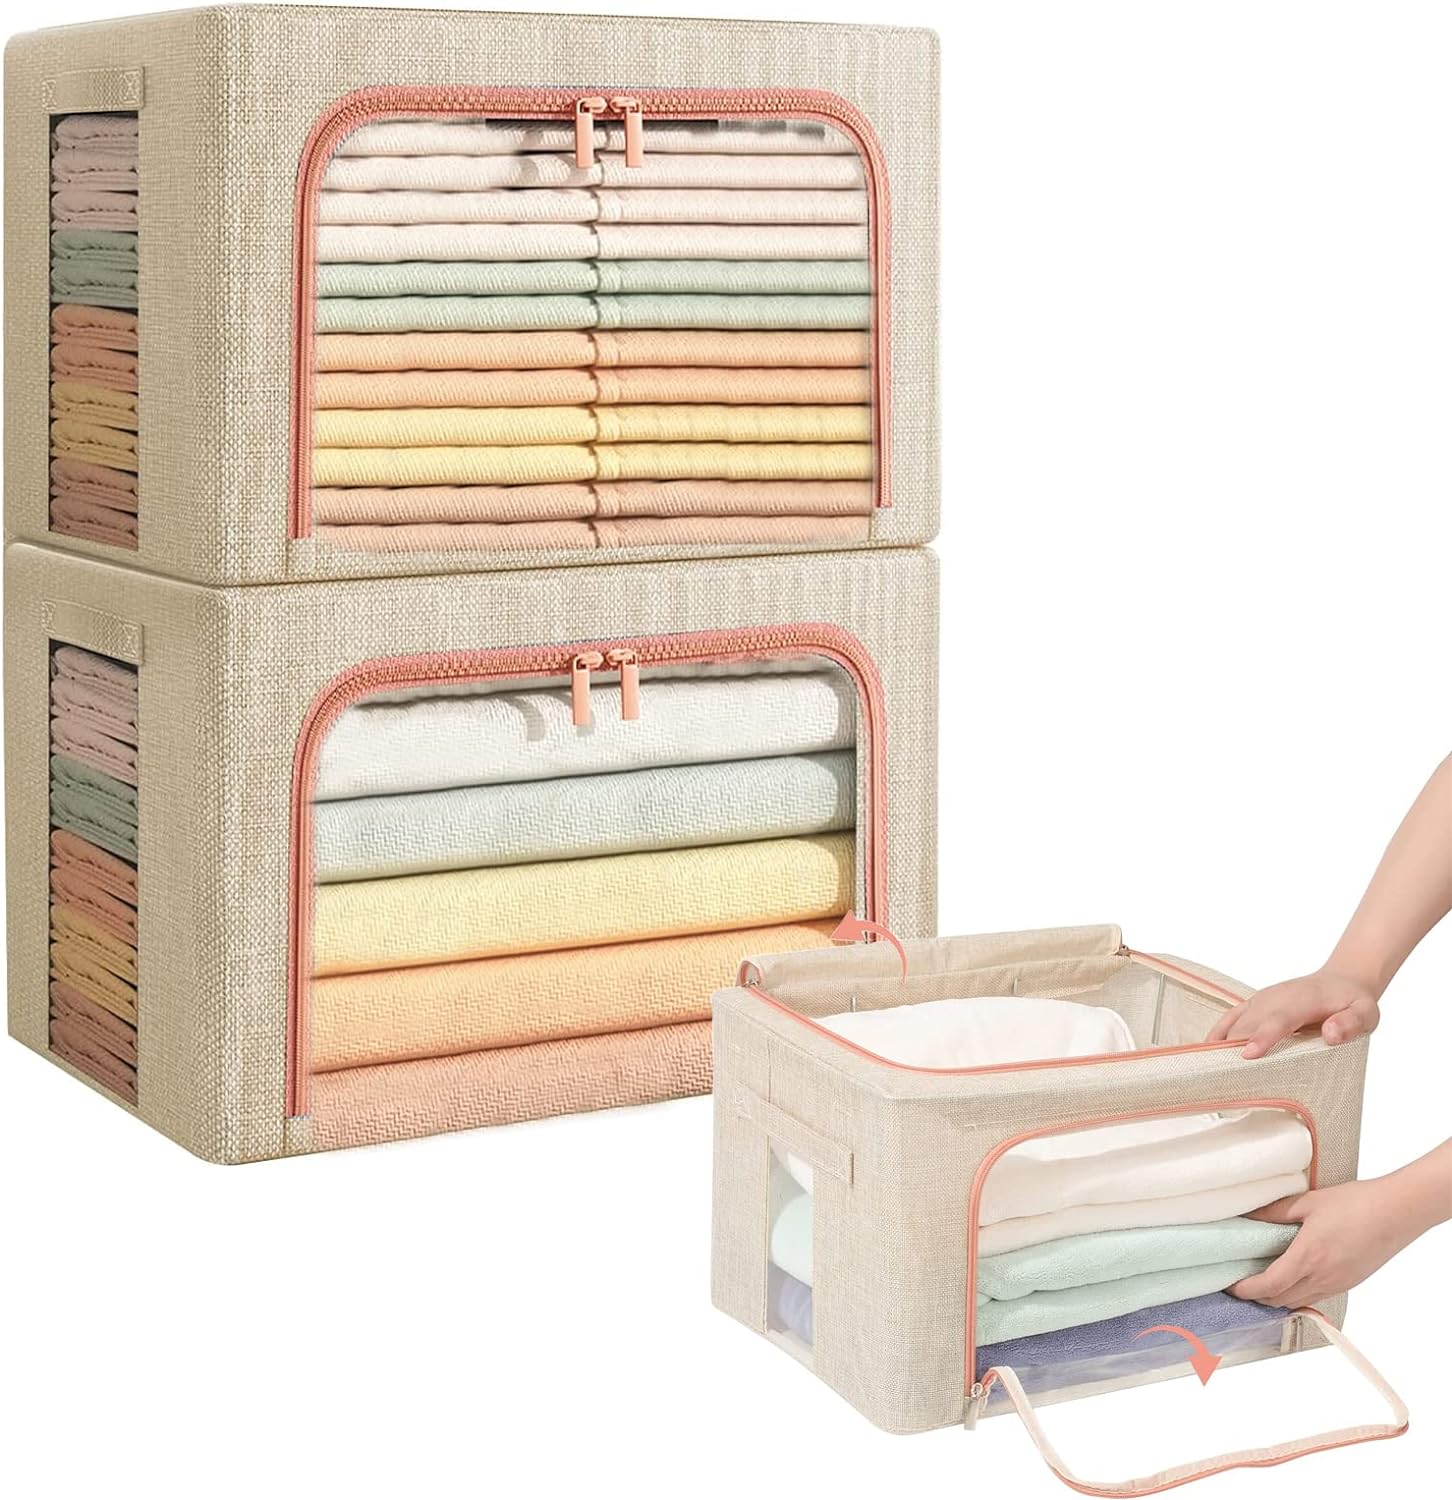 A person is placing dresses into the 2 x 66L Foldable Large Capacity Cloth Storage